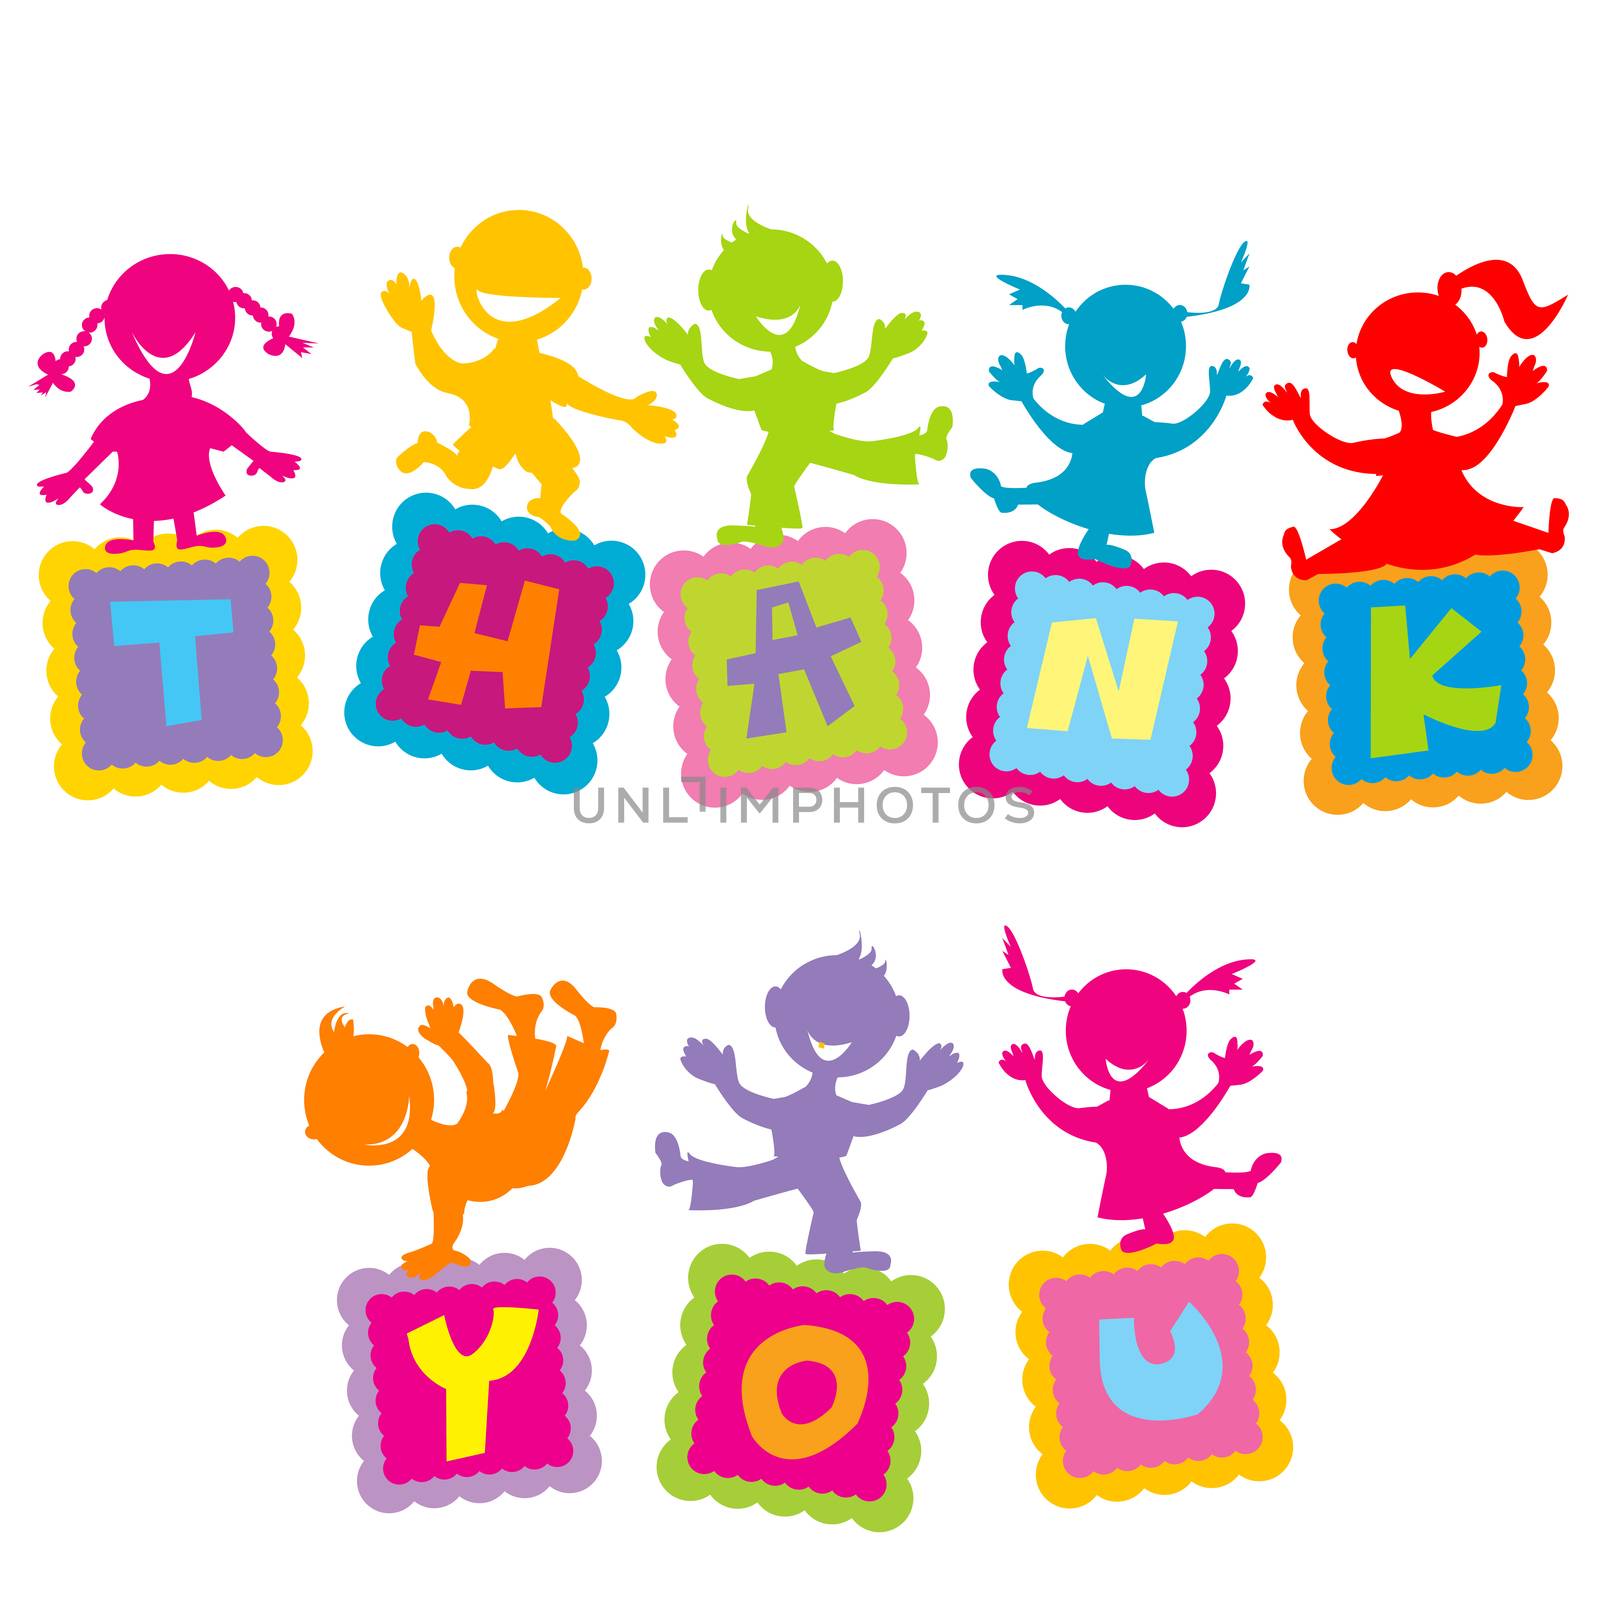 Thank you card with cartoon colored kids